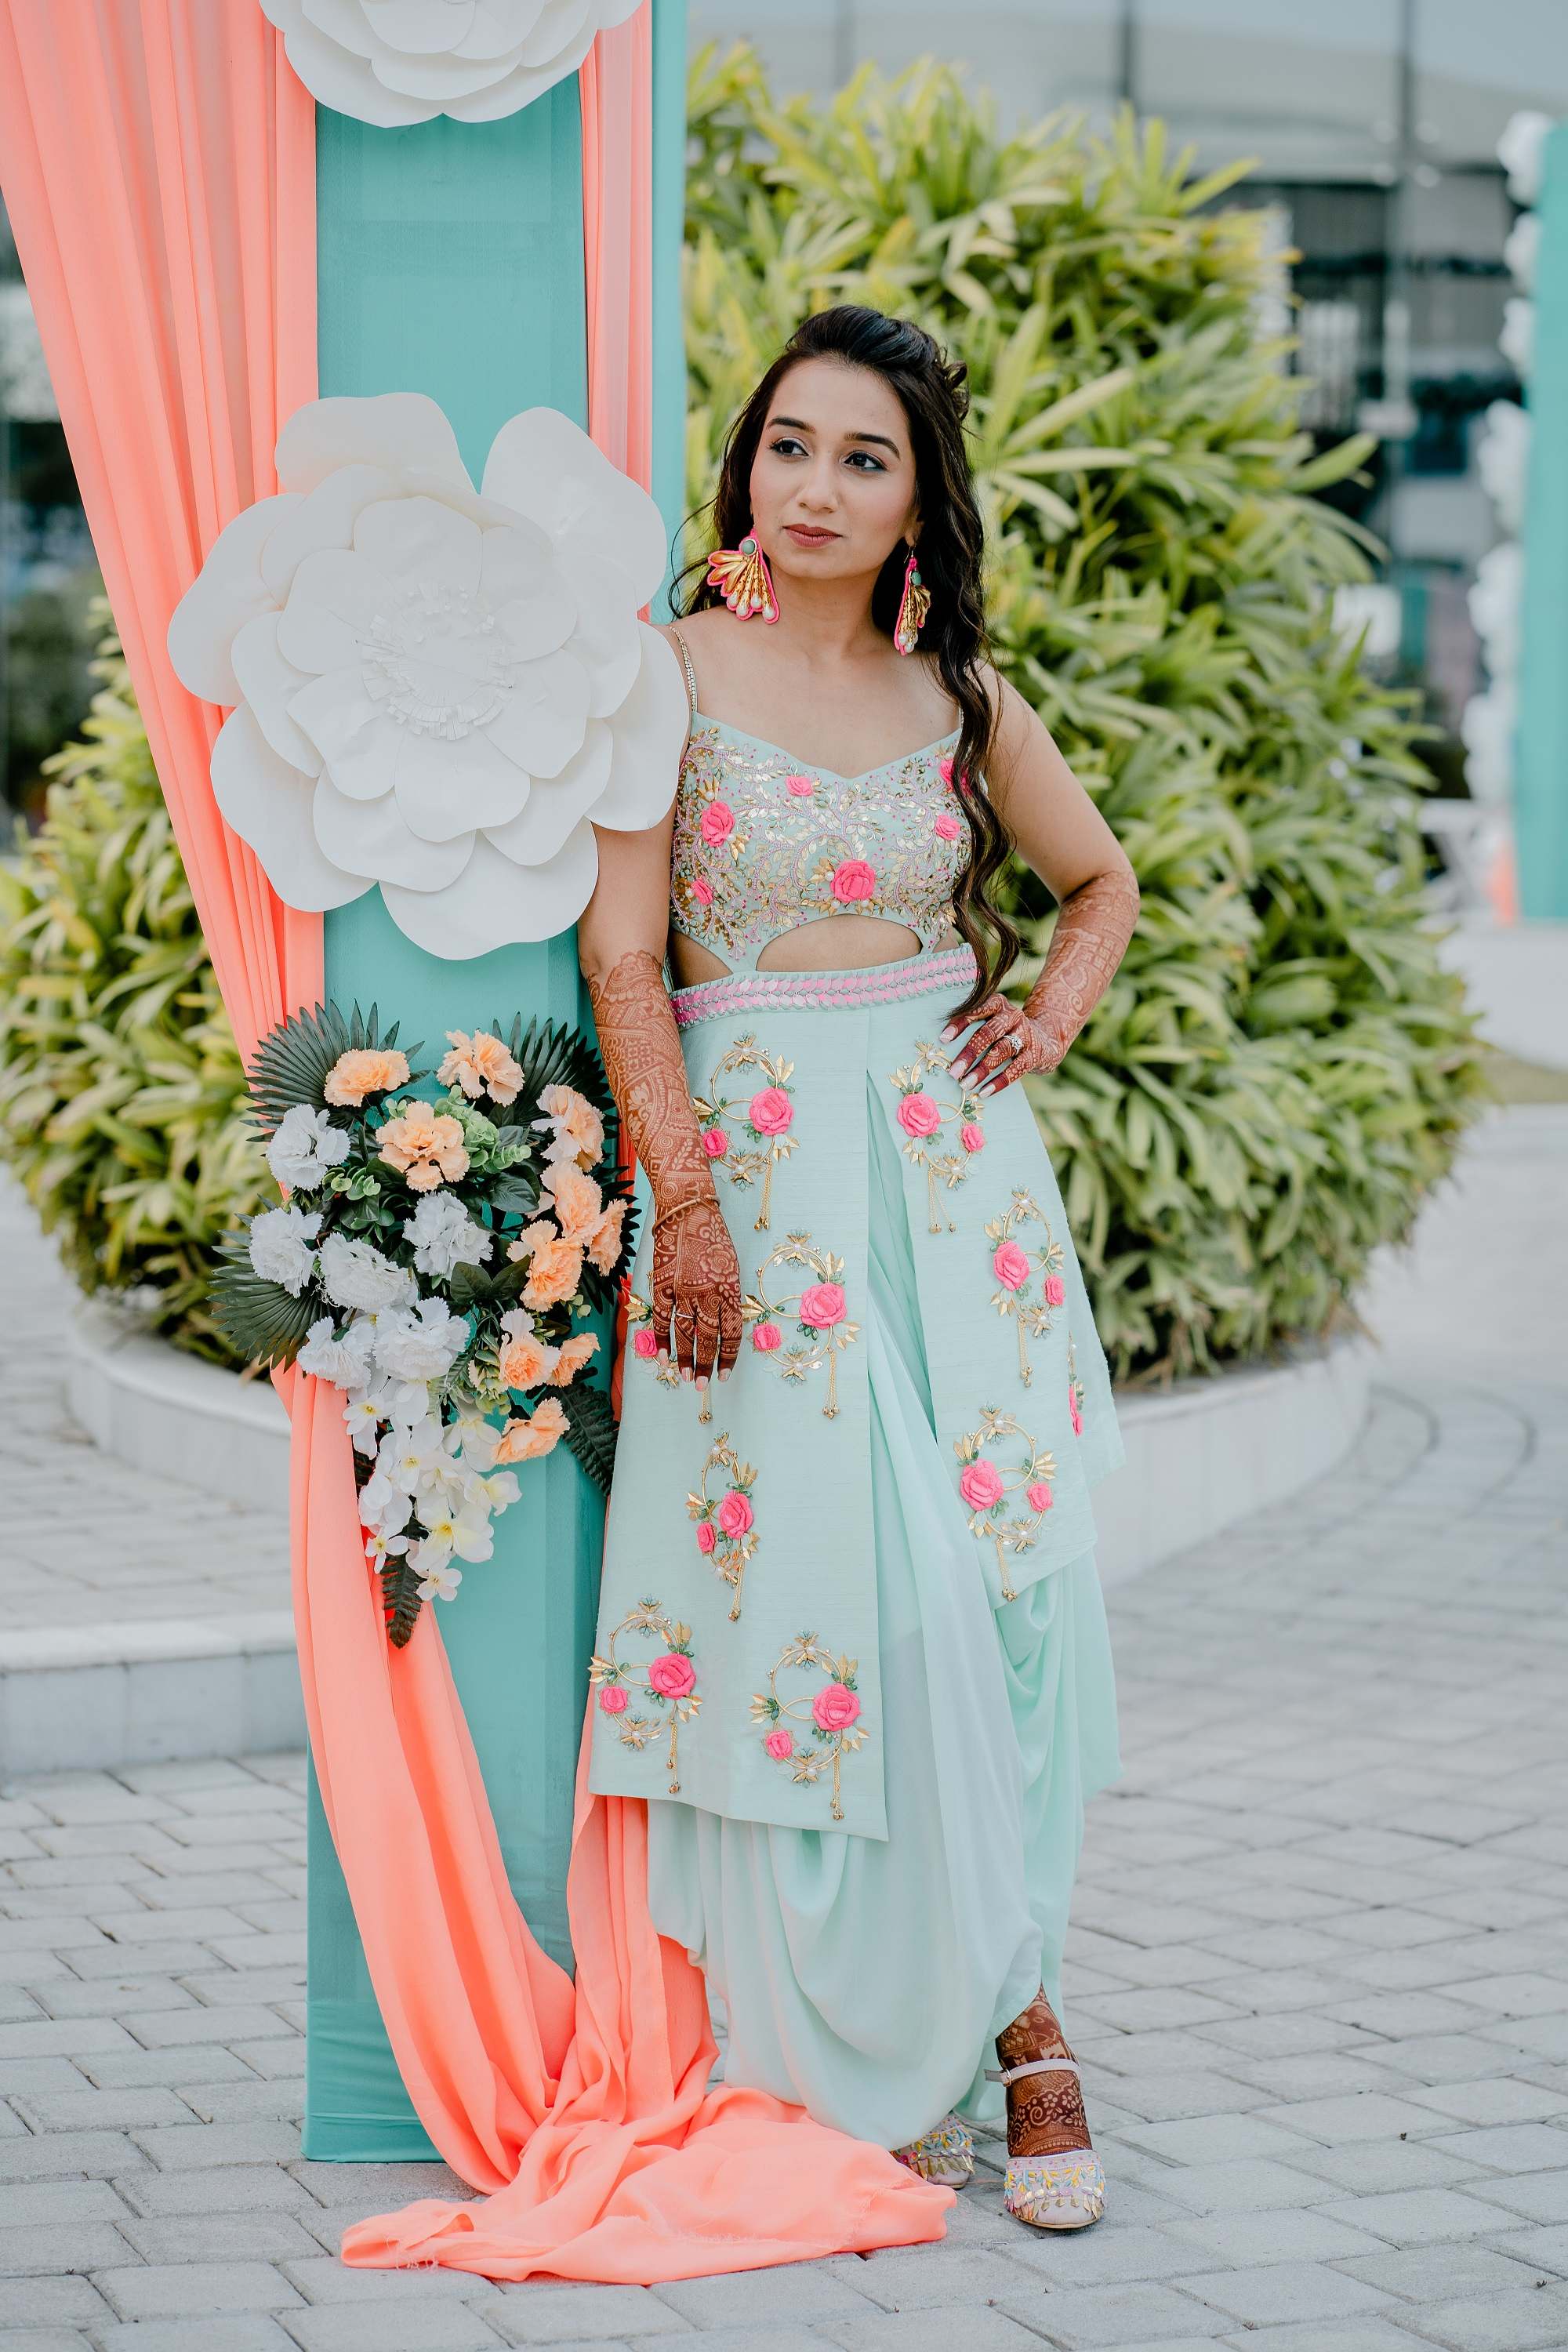 15+ Amazing Pool Party Dress Ideas For Your Wedding